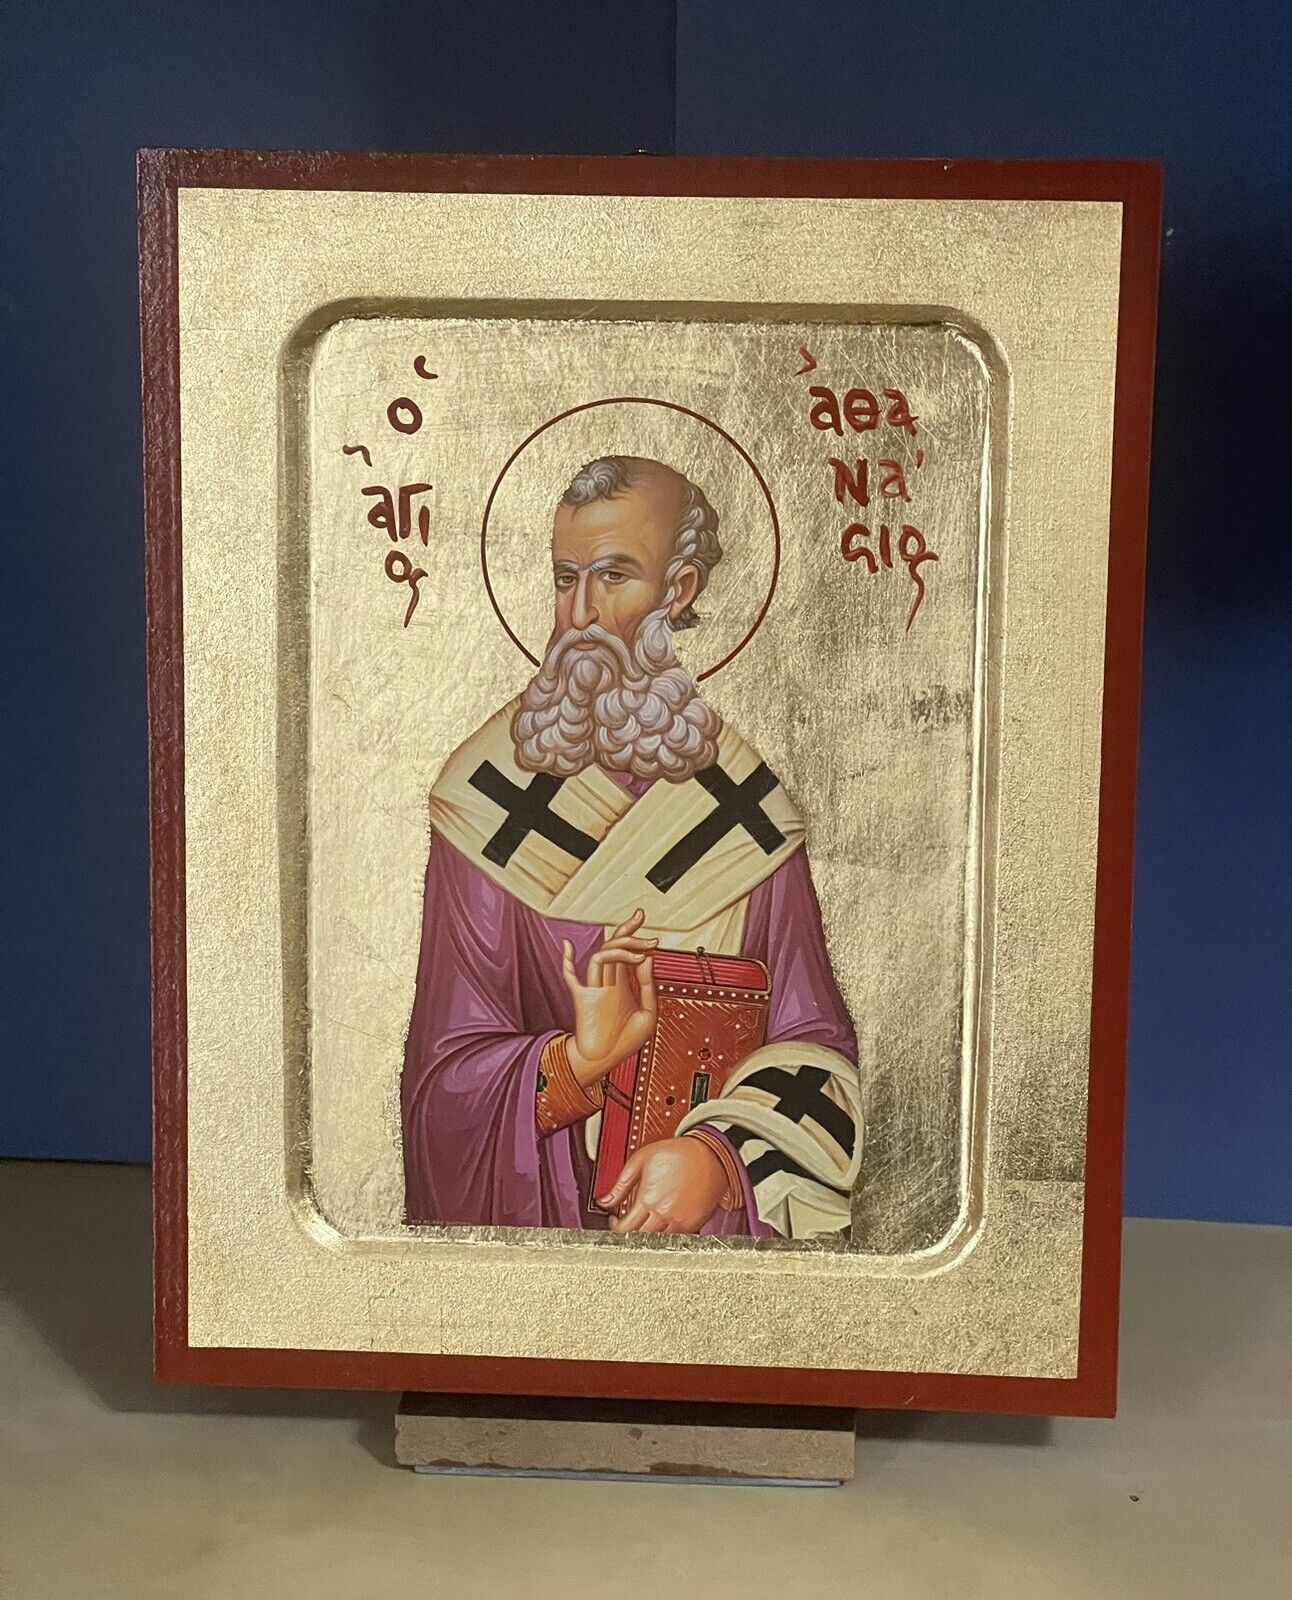 Saint Athanasius the Great - Greek Russian Orthodox Wooden Cared Icon 8x10 Inch